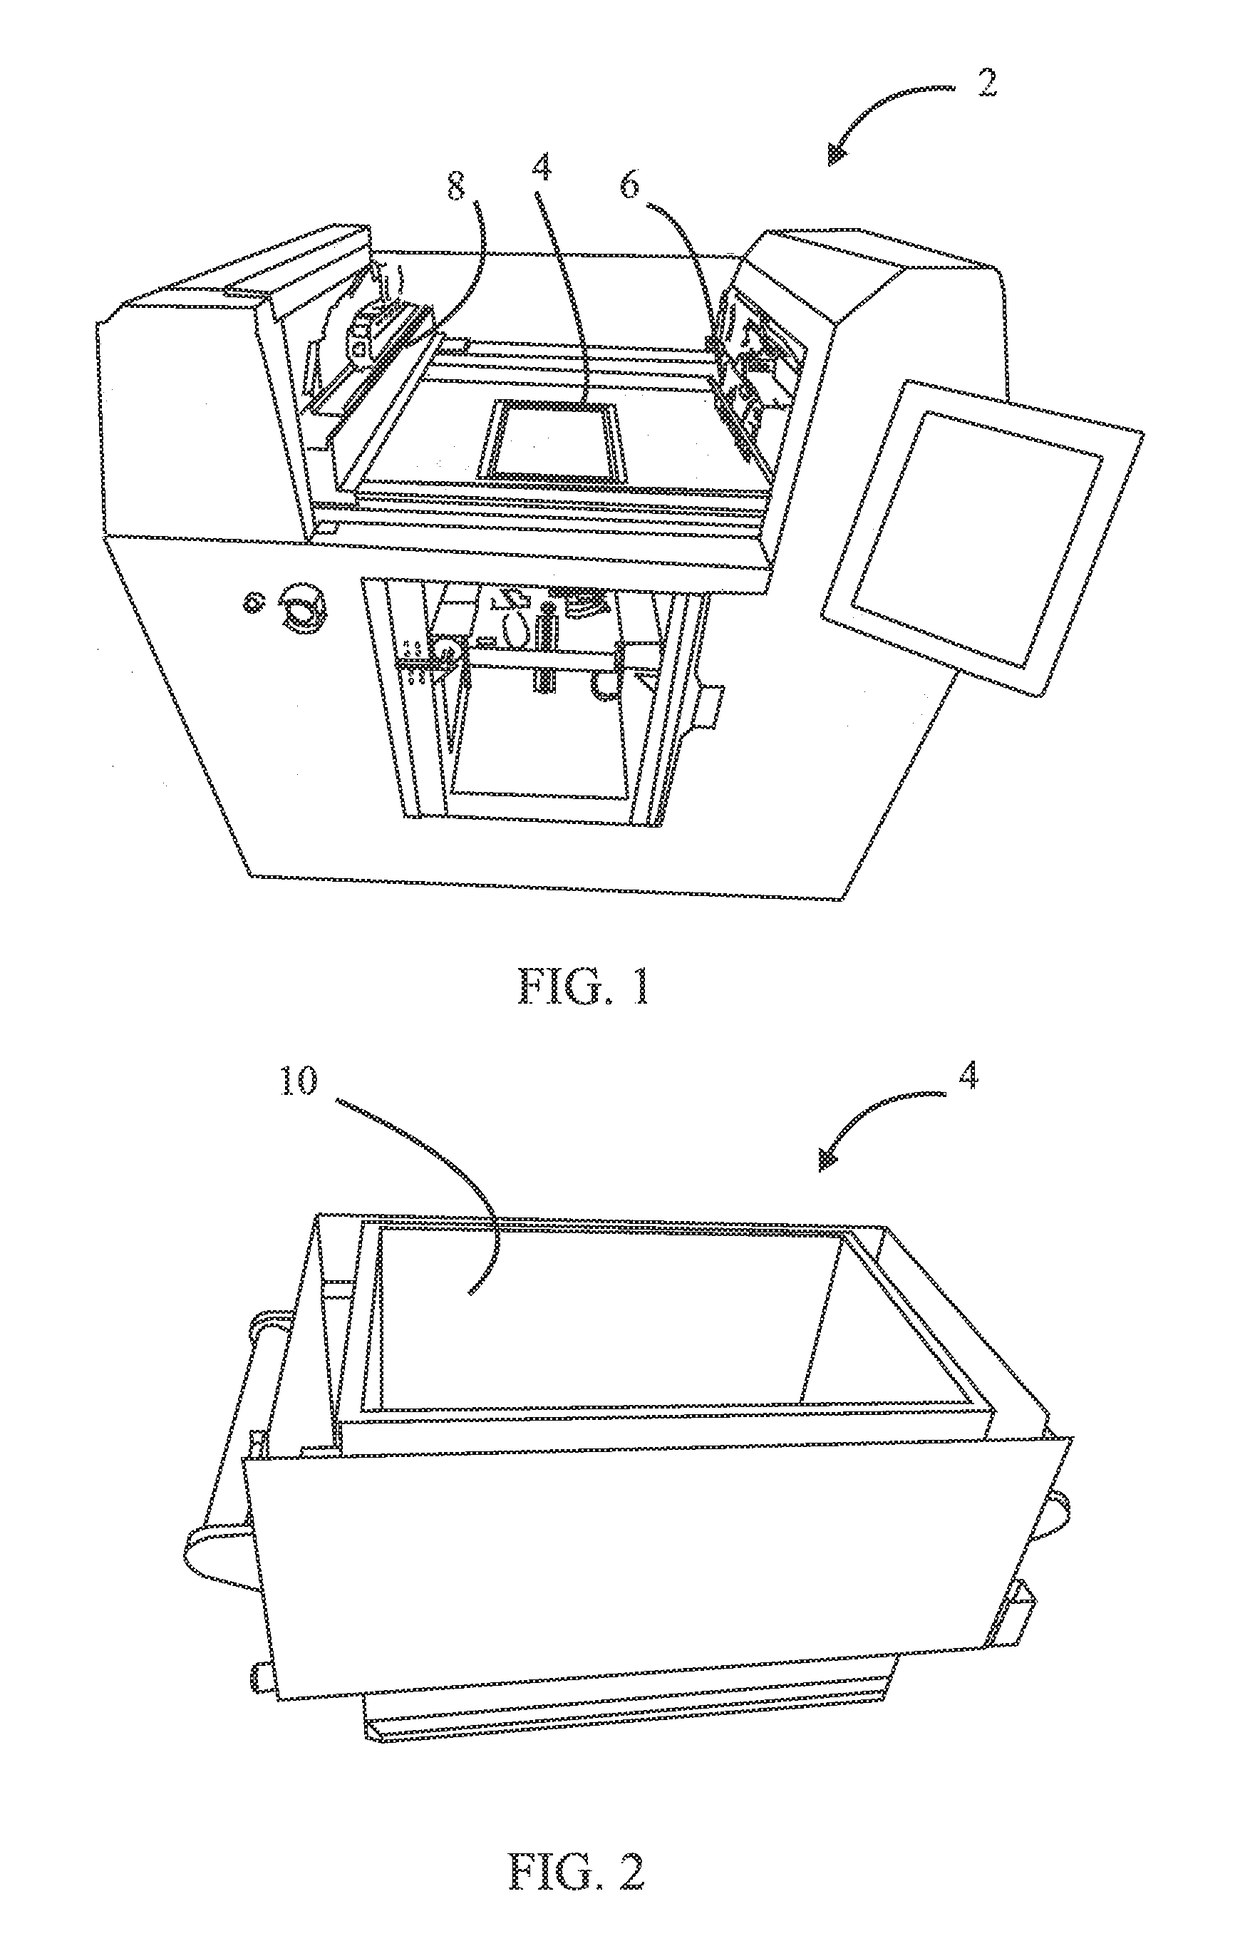 Methods and Apparatuses for Curing Three-Dimensional Printed Articles